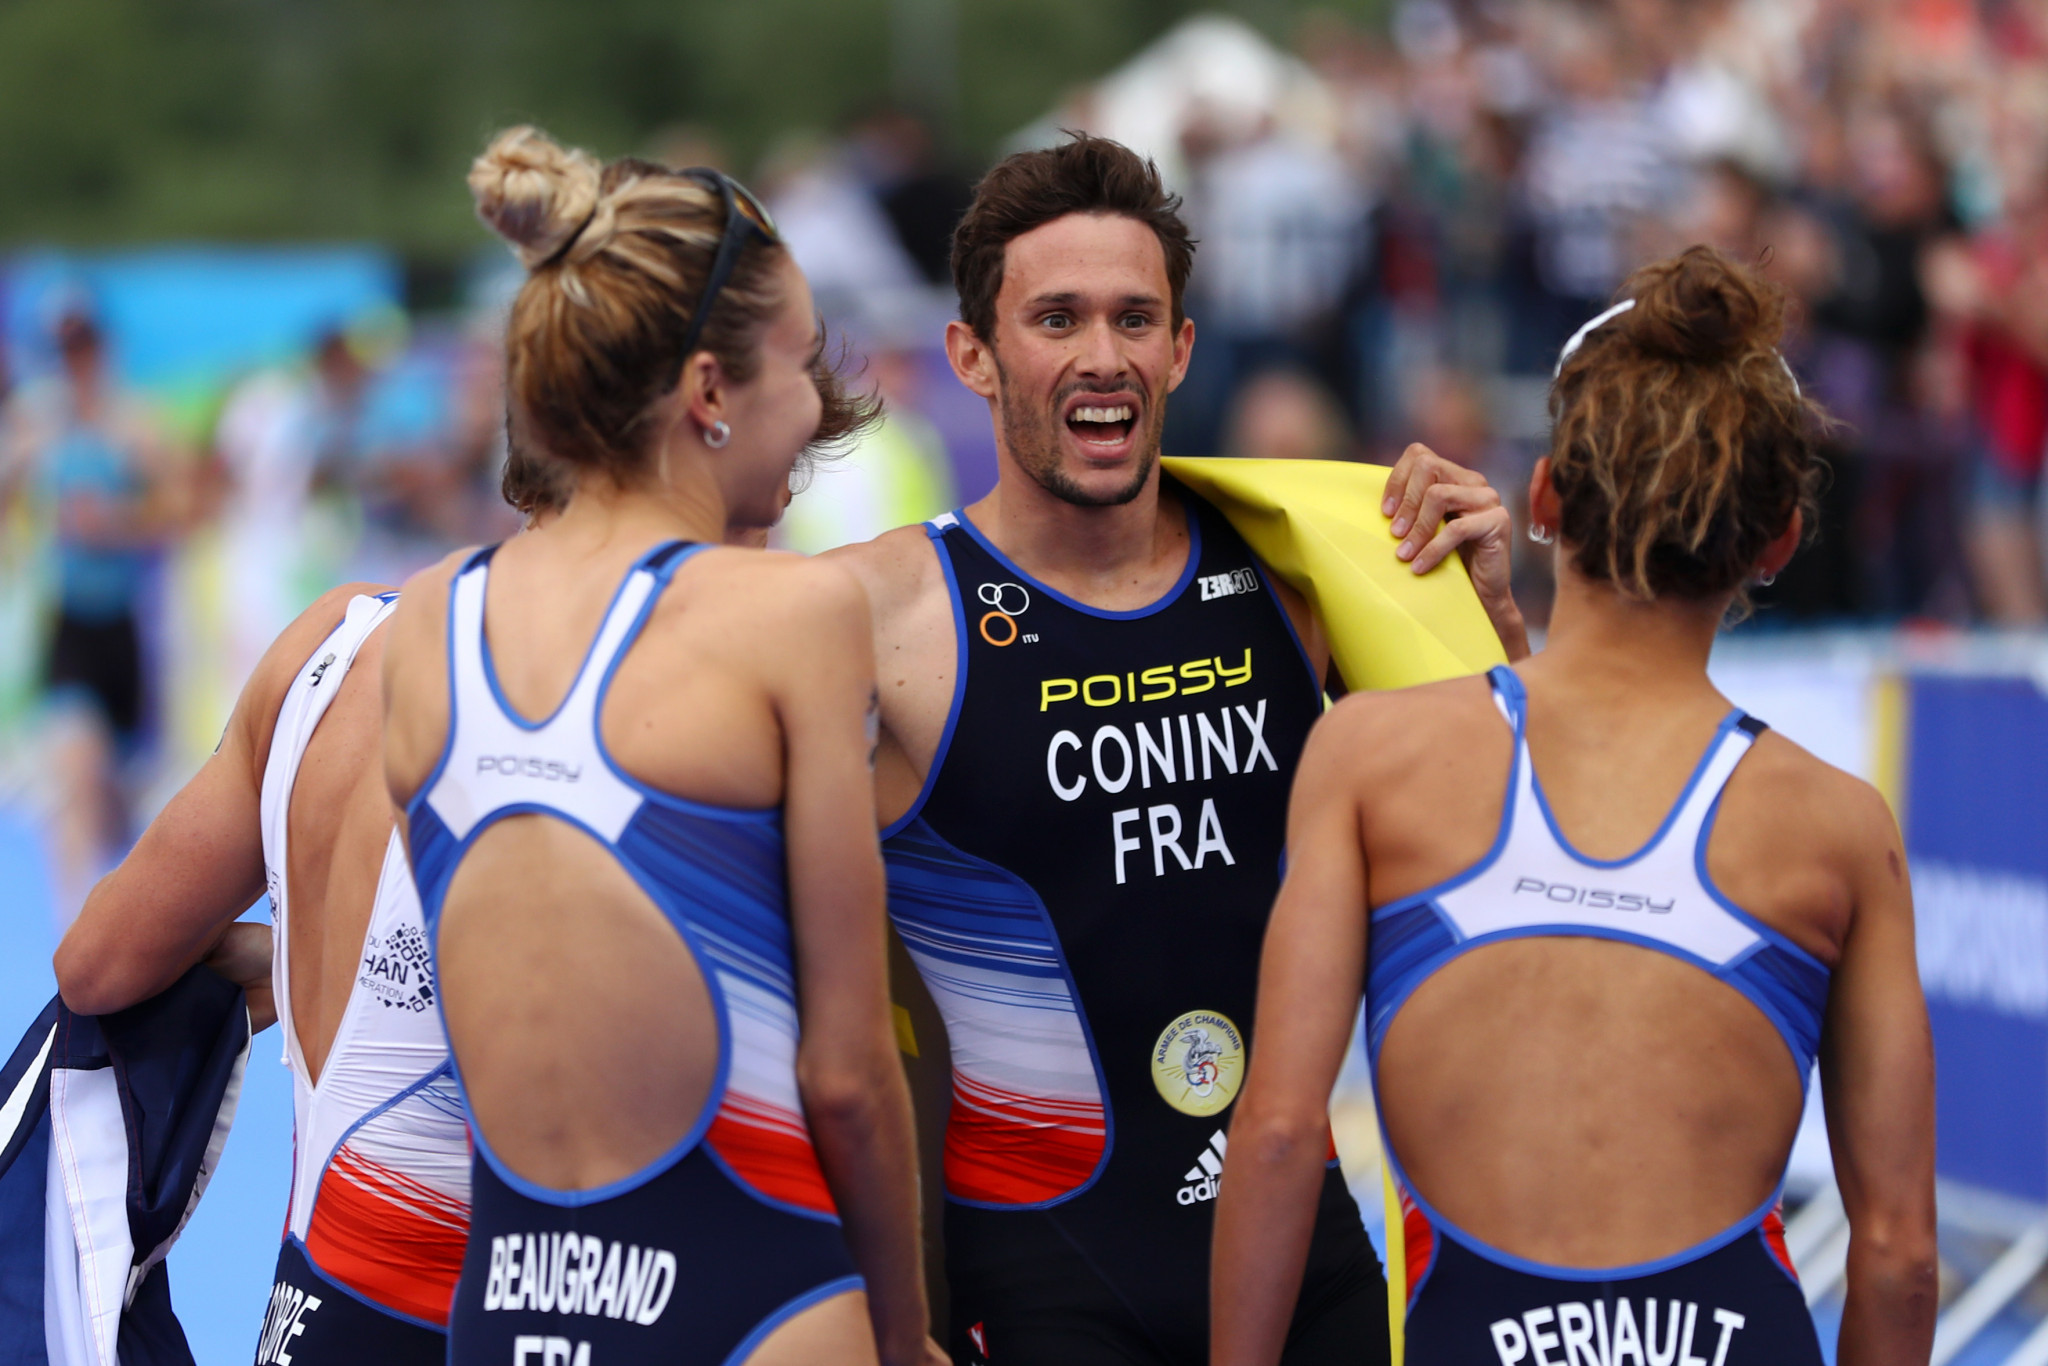 Dorian Coninx wrapped up world champions France's success in the mixed team relay triathlon event